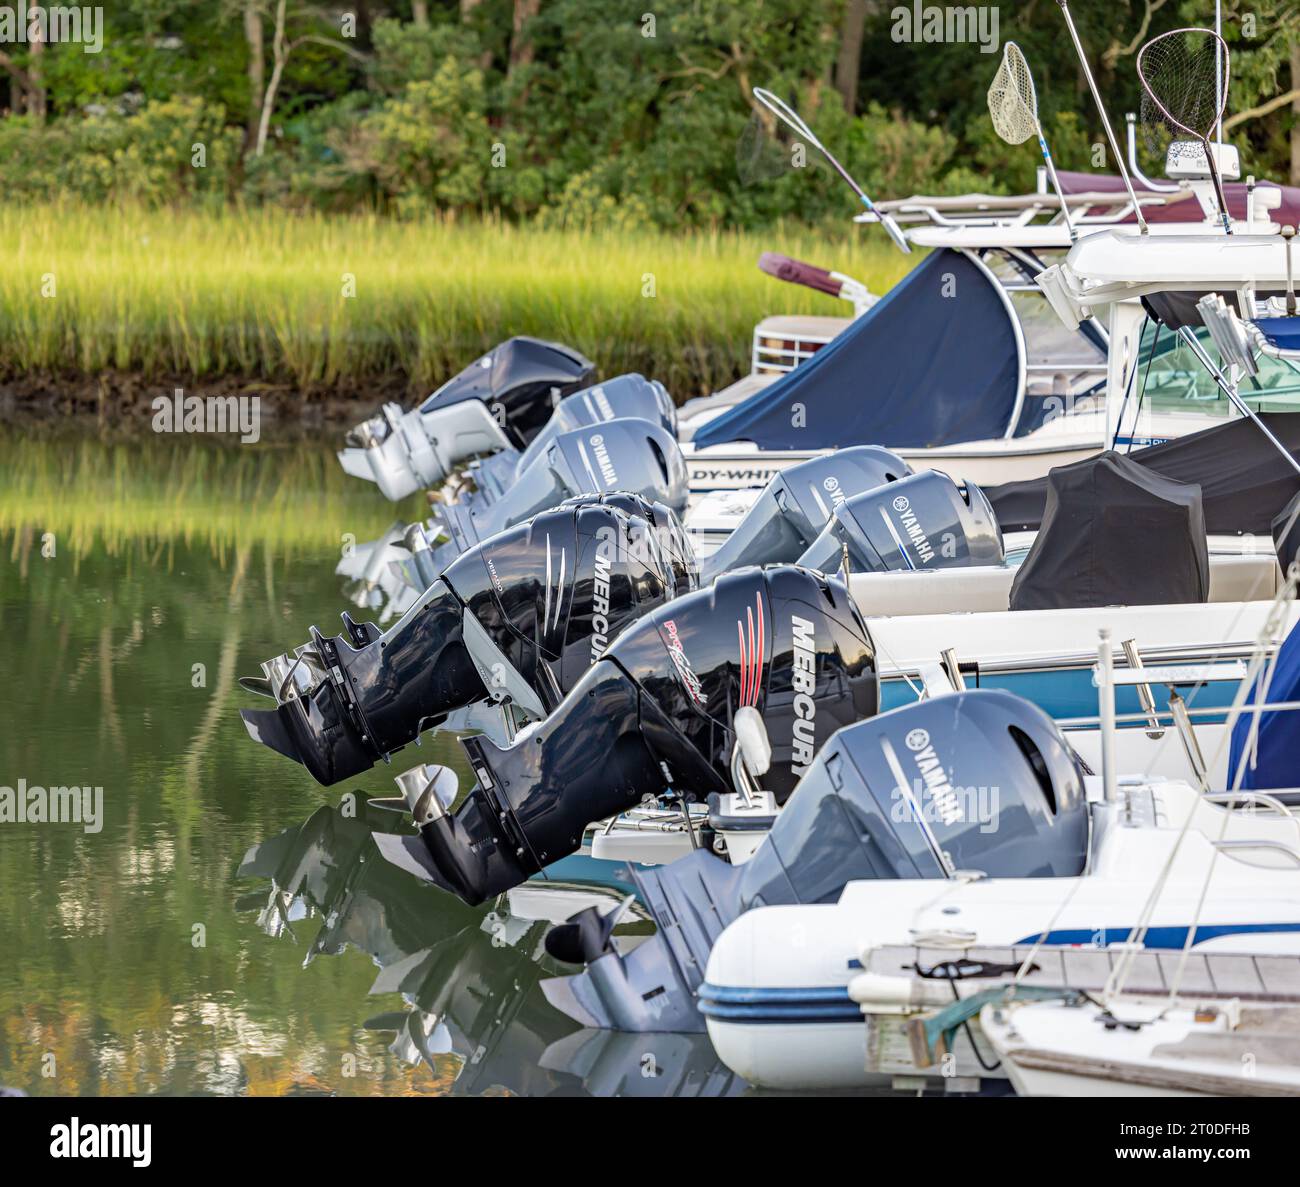 detail image of outboard engines in a row at a marina Stock Photo